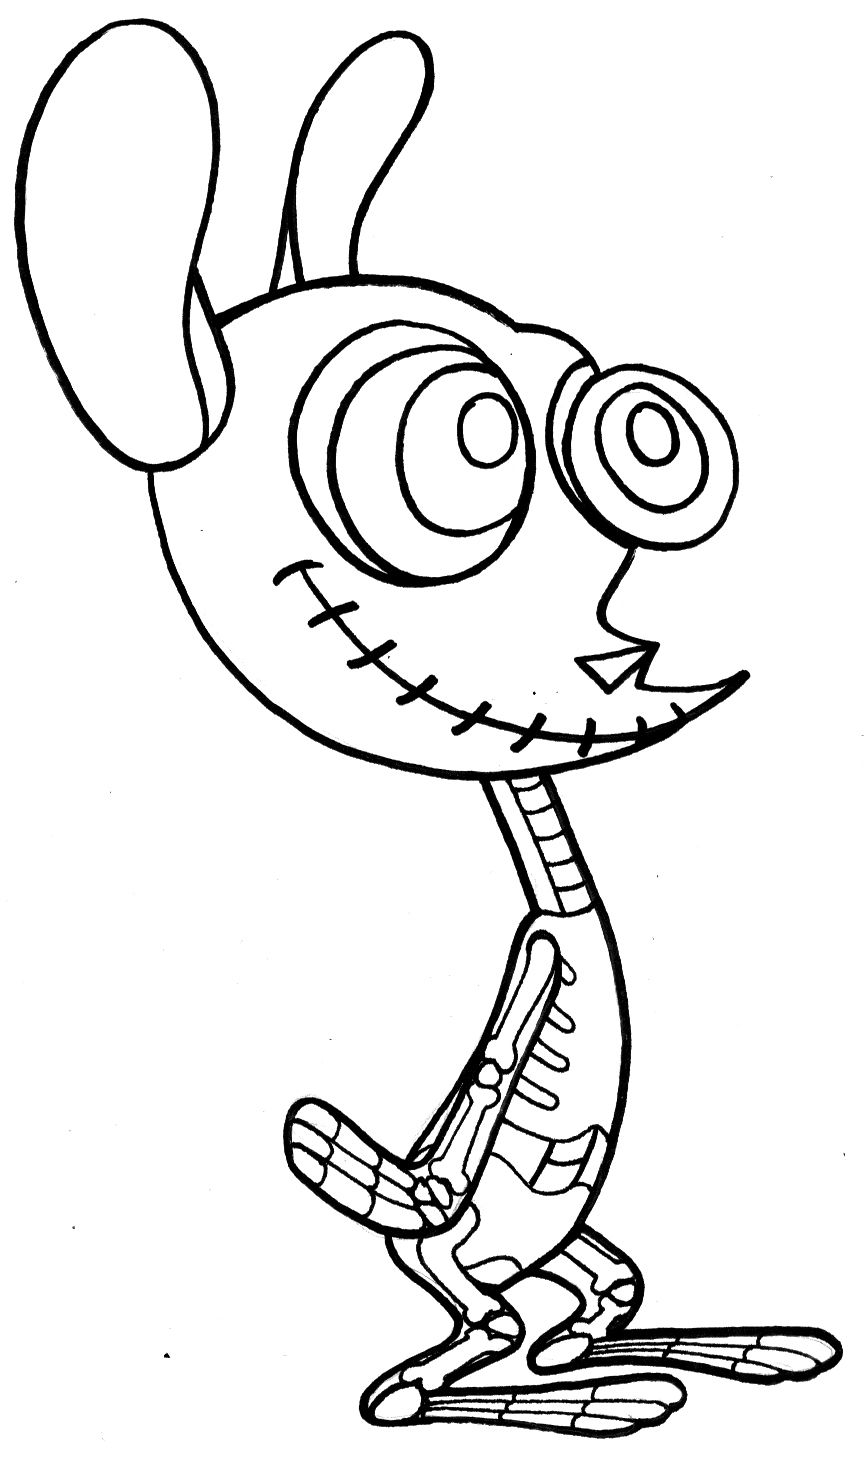 Wenchkin's Coloring Pages - Skele - Ren | Coloring pages, Skull coloring  pages, Cute coloring pages